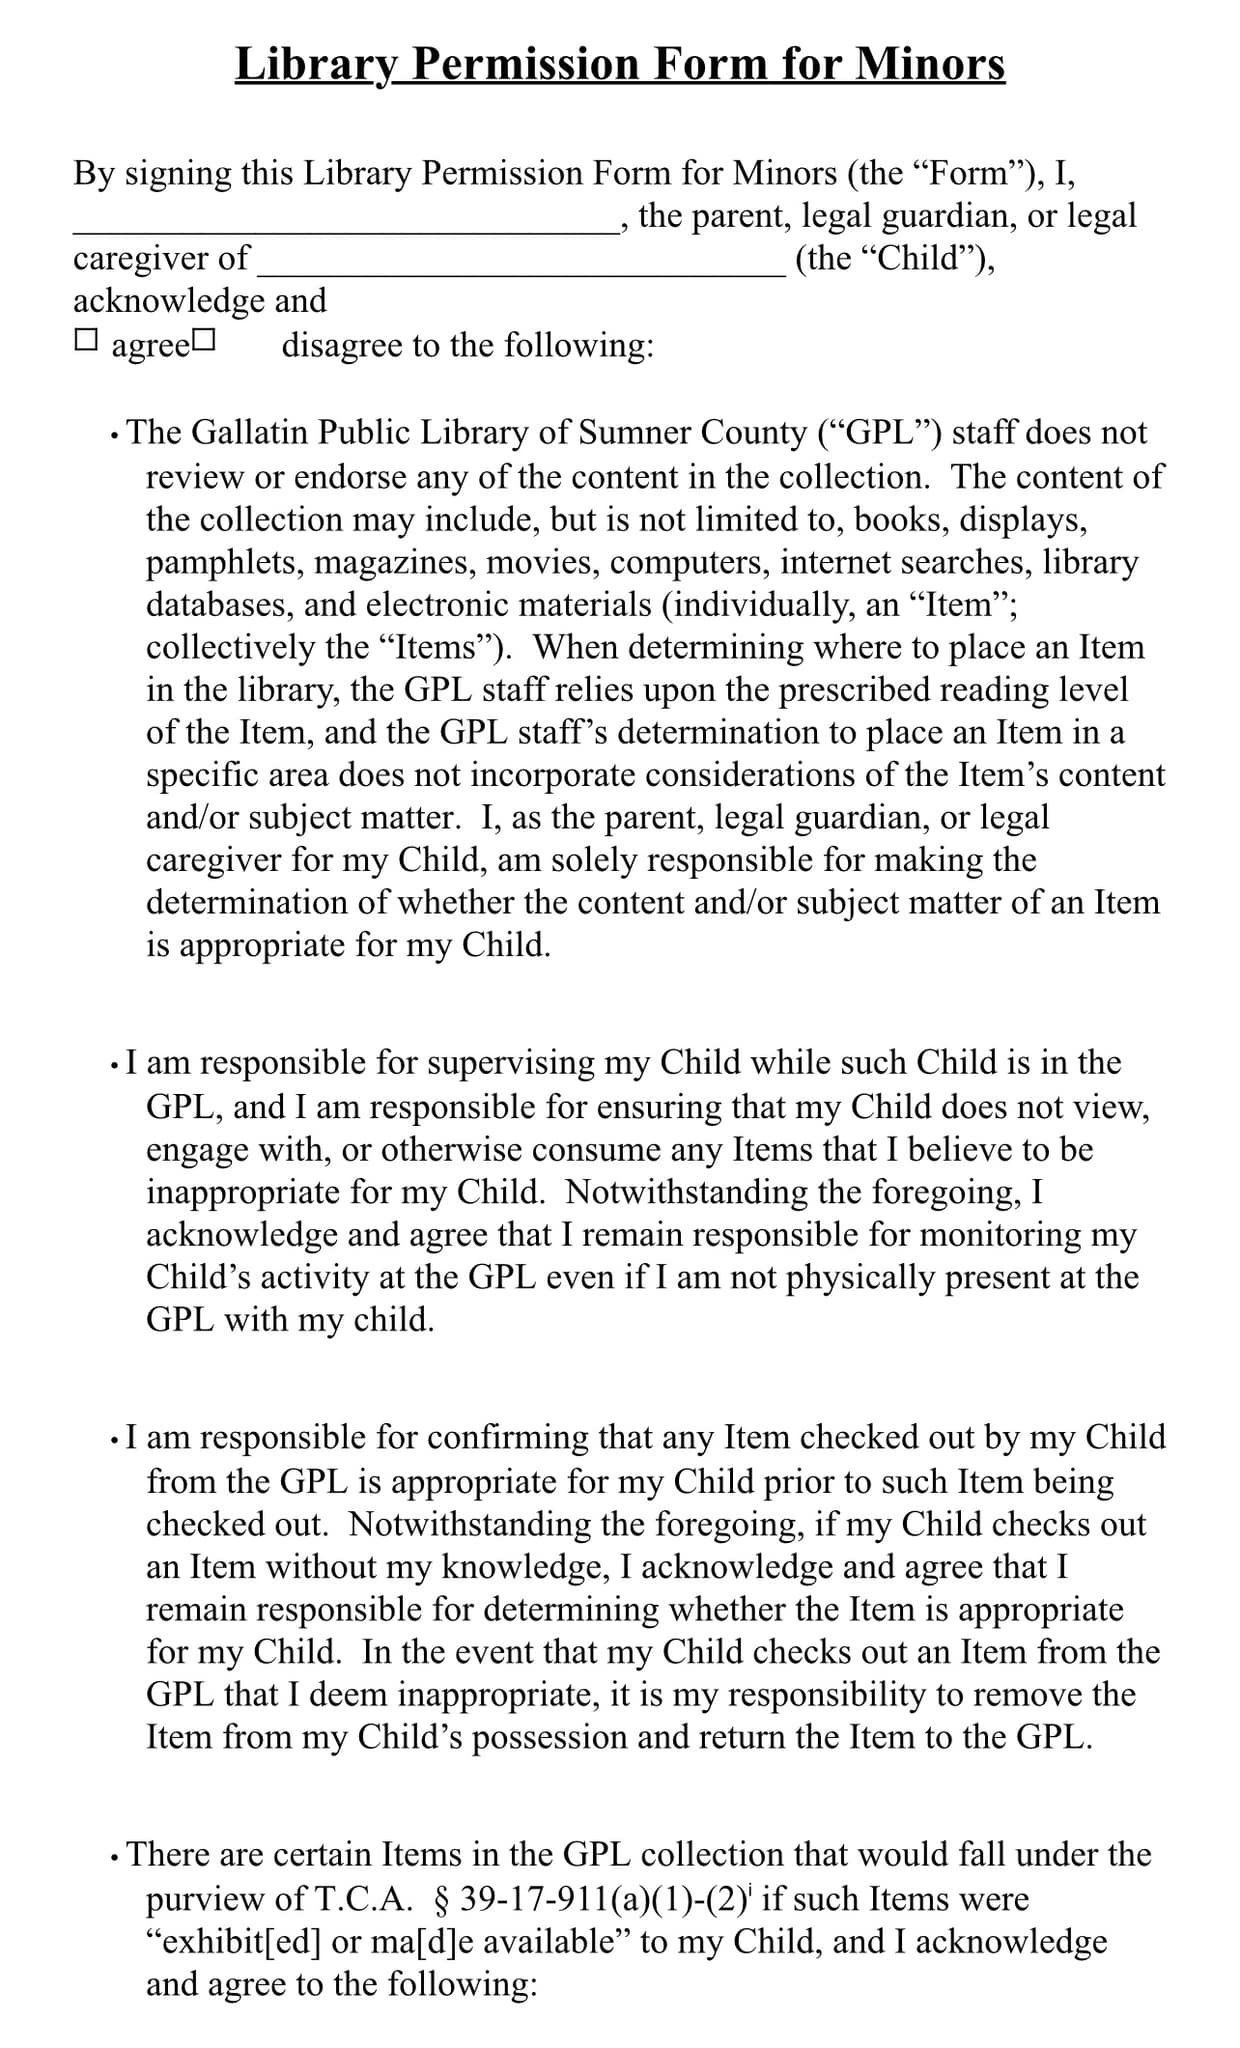 permission slip for minor library access, page 1. 